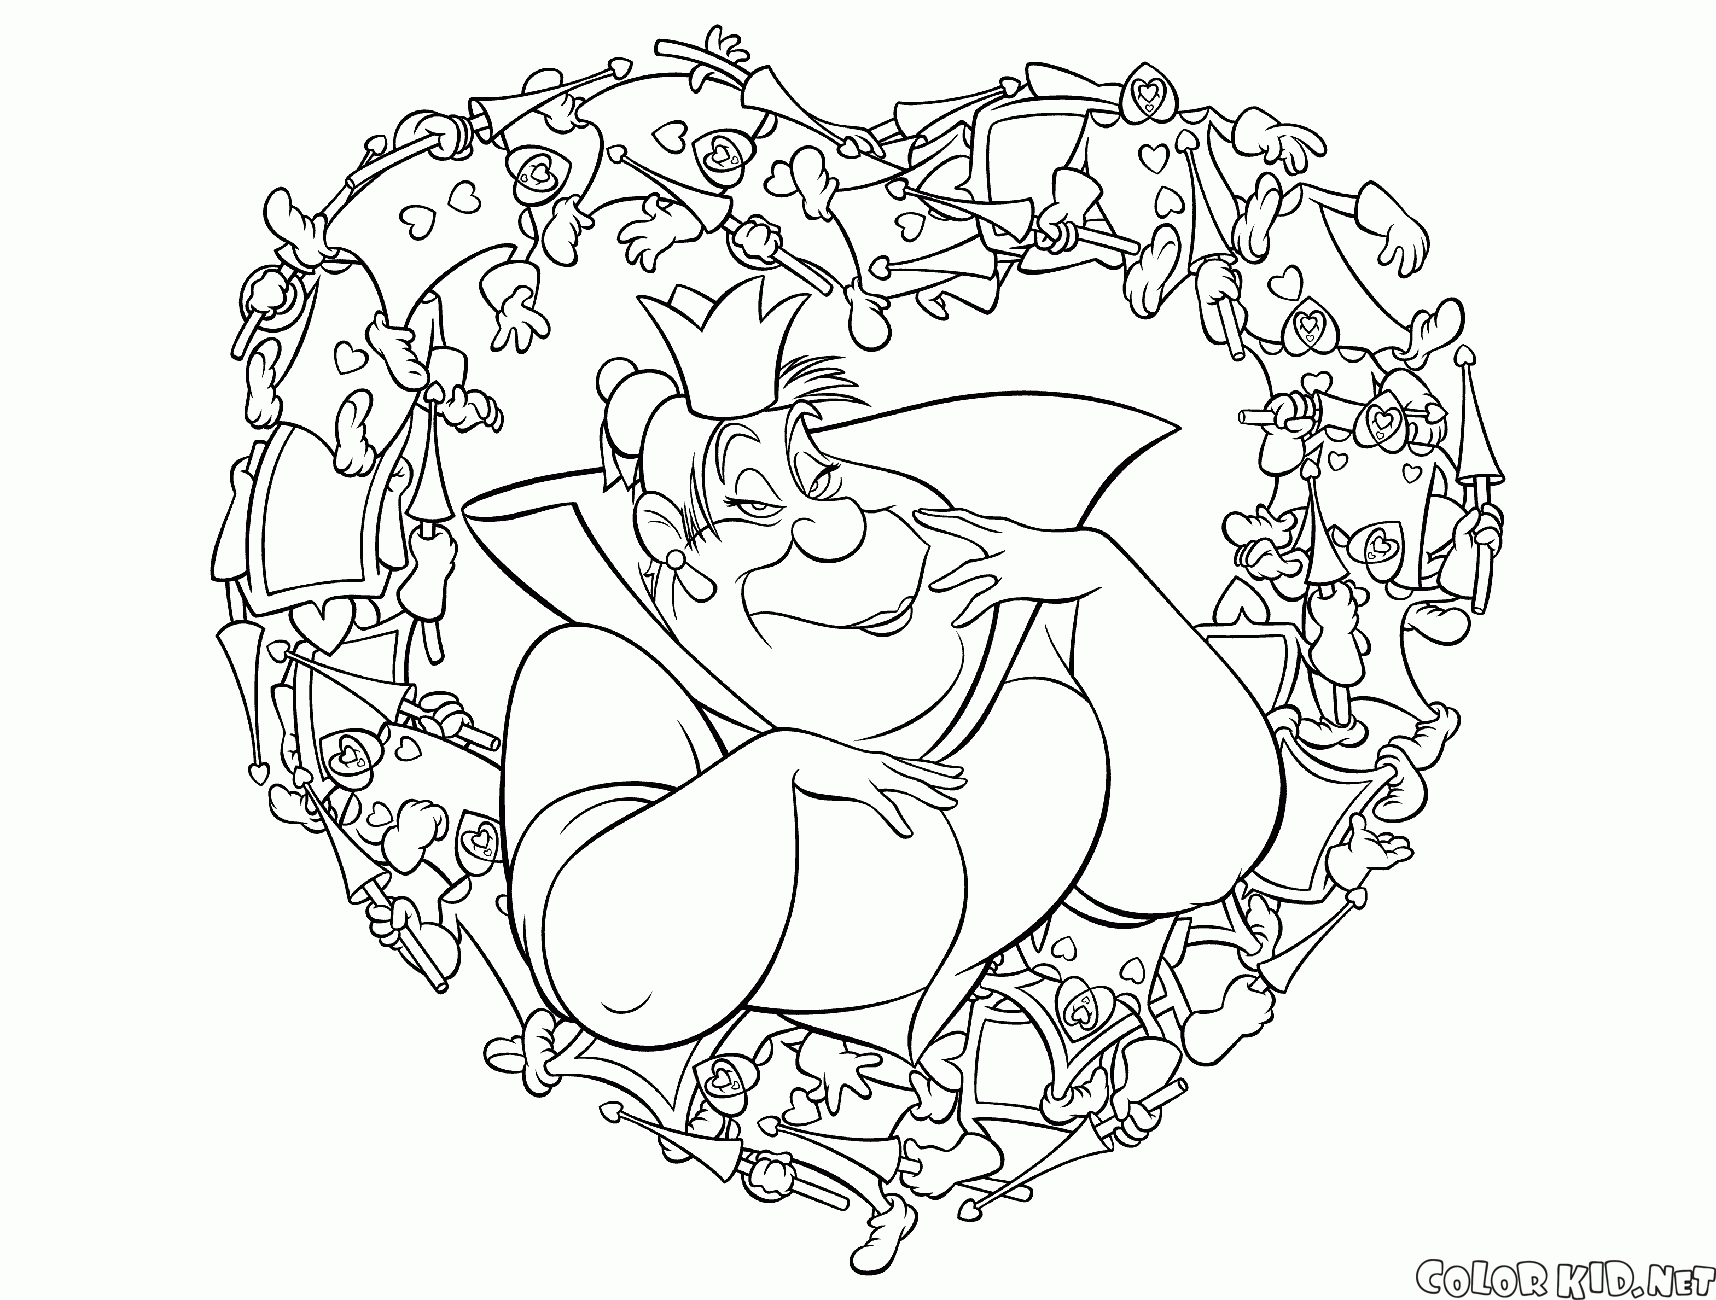 Coloring page - Alice in Wonderland